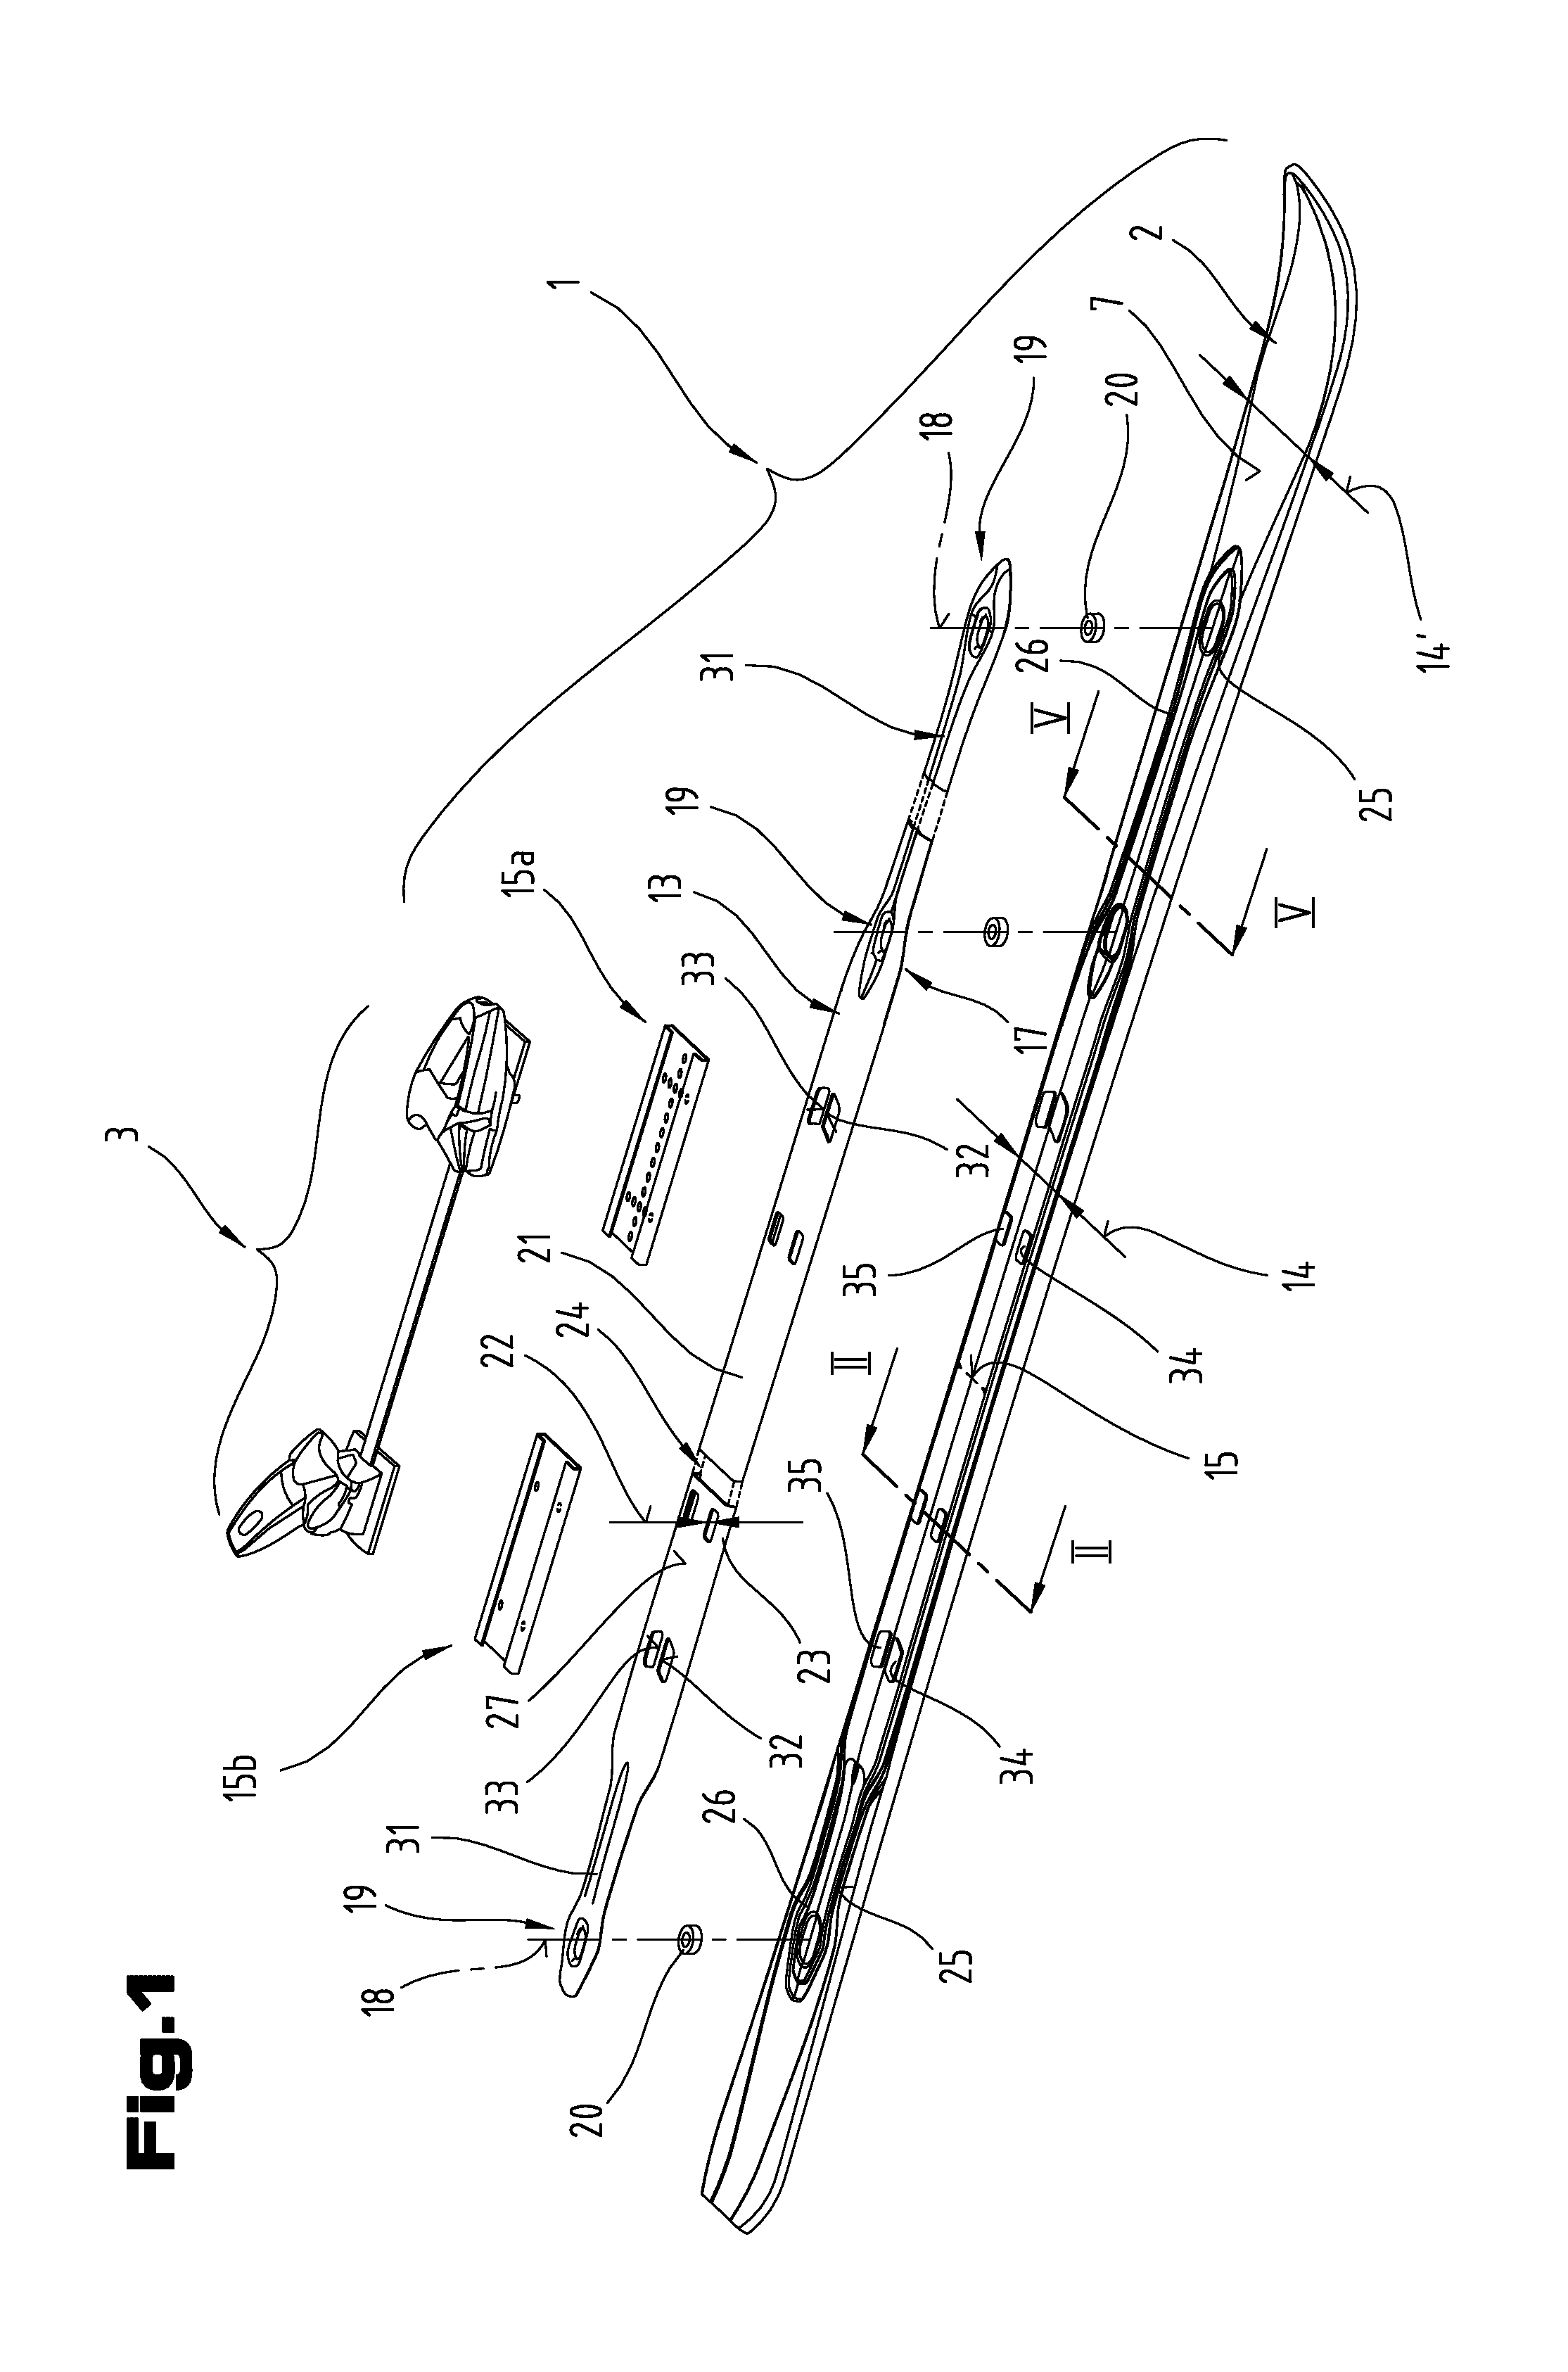 Board-like sliding device in the form of a ski or snowboard